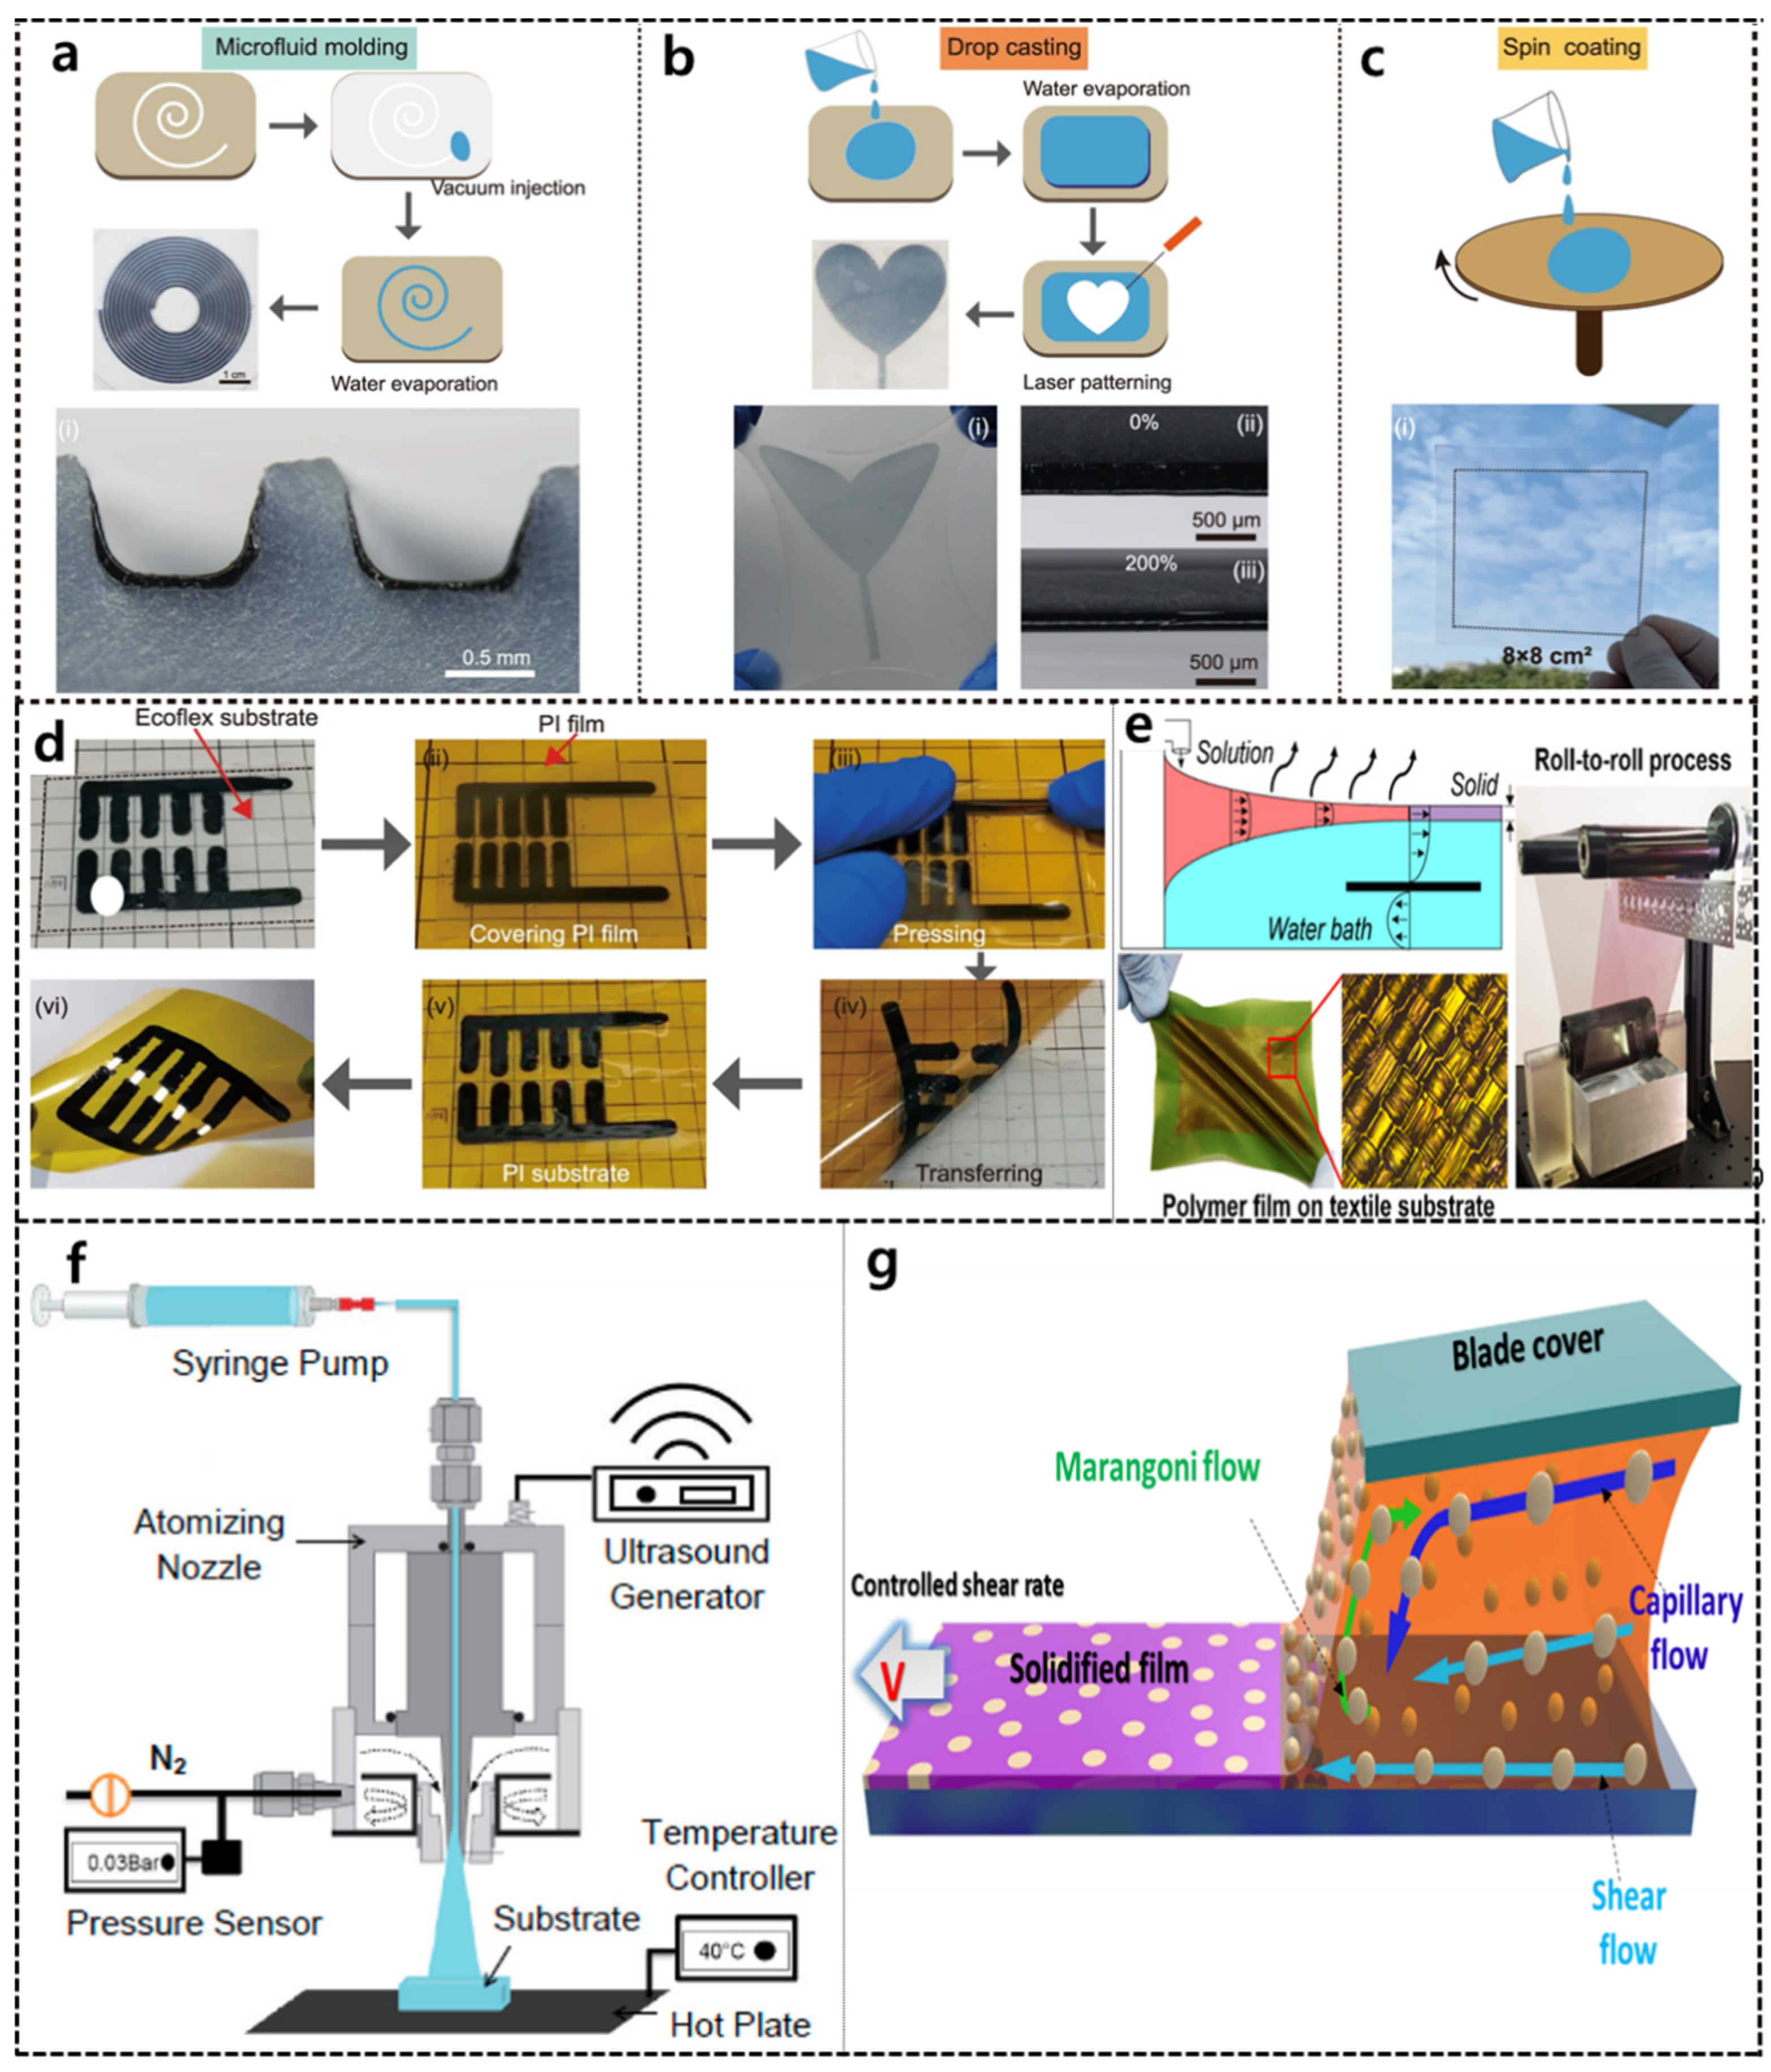 Polymers | Free and Recent Devices Implementations Conductive Developments Applications | Full-Text Sensing in Flexible of Polymer-Based